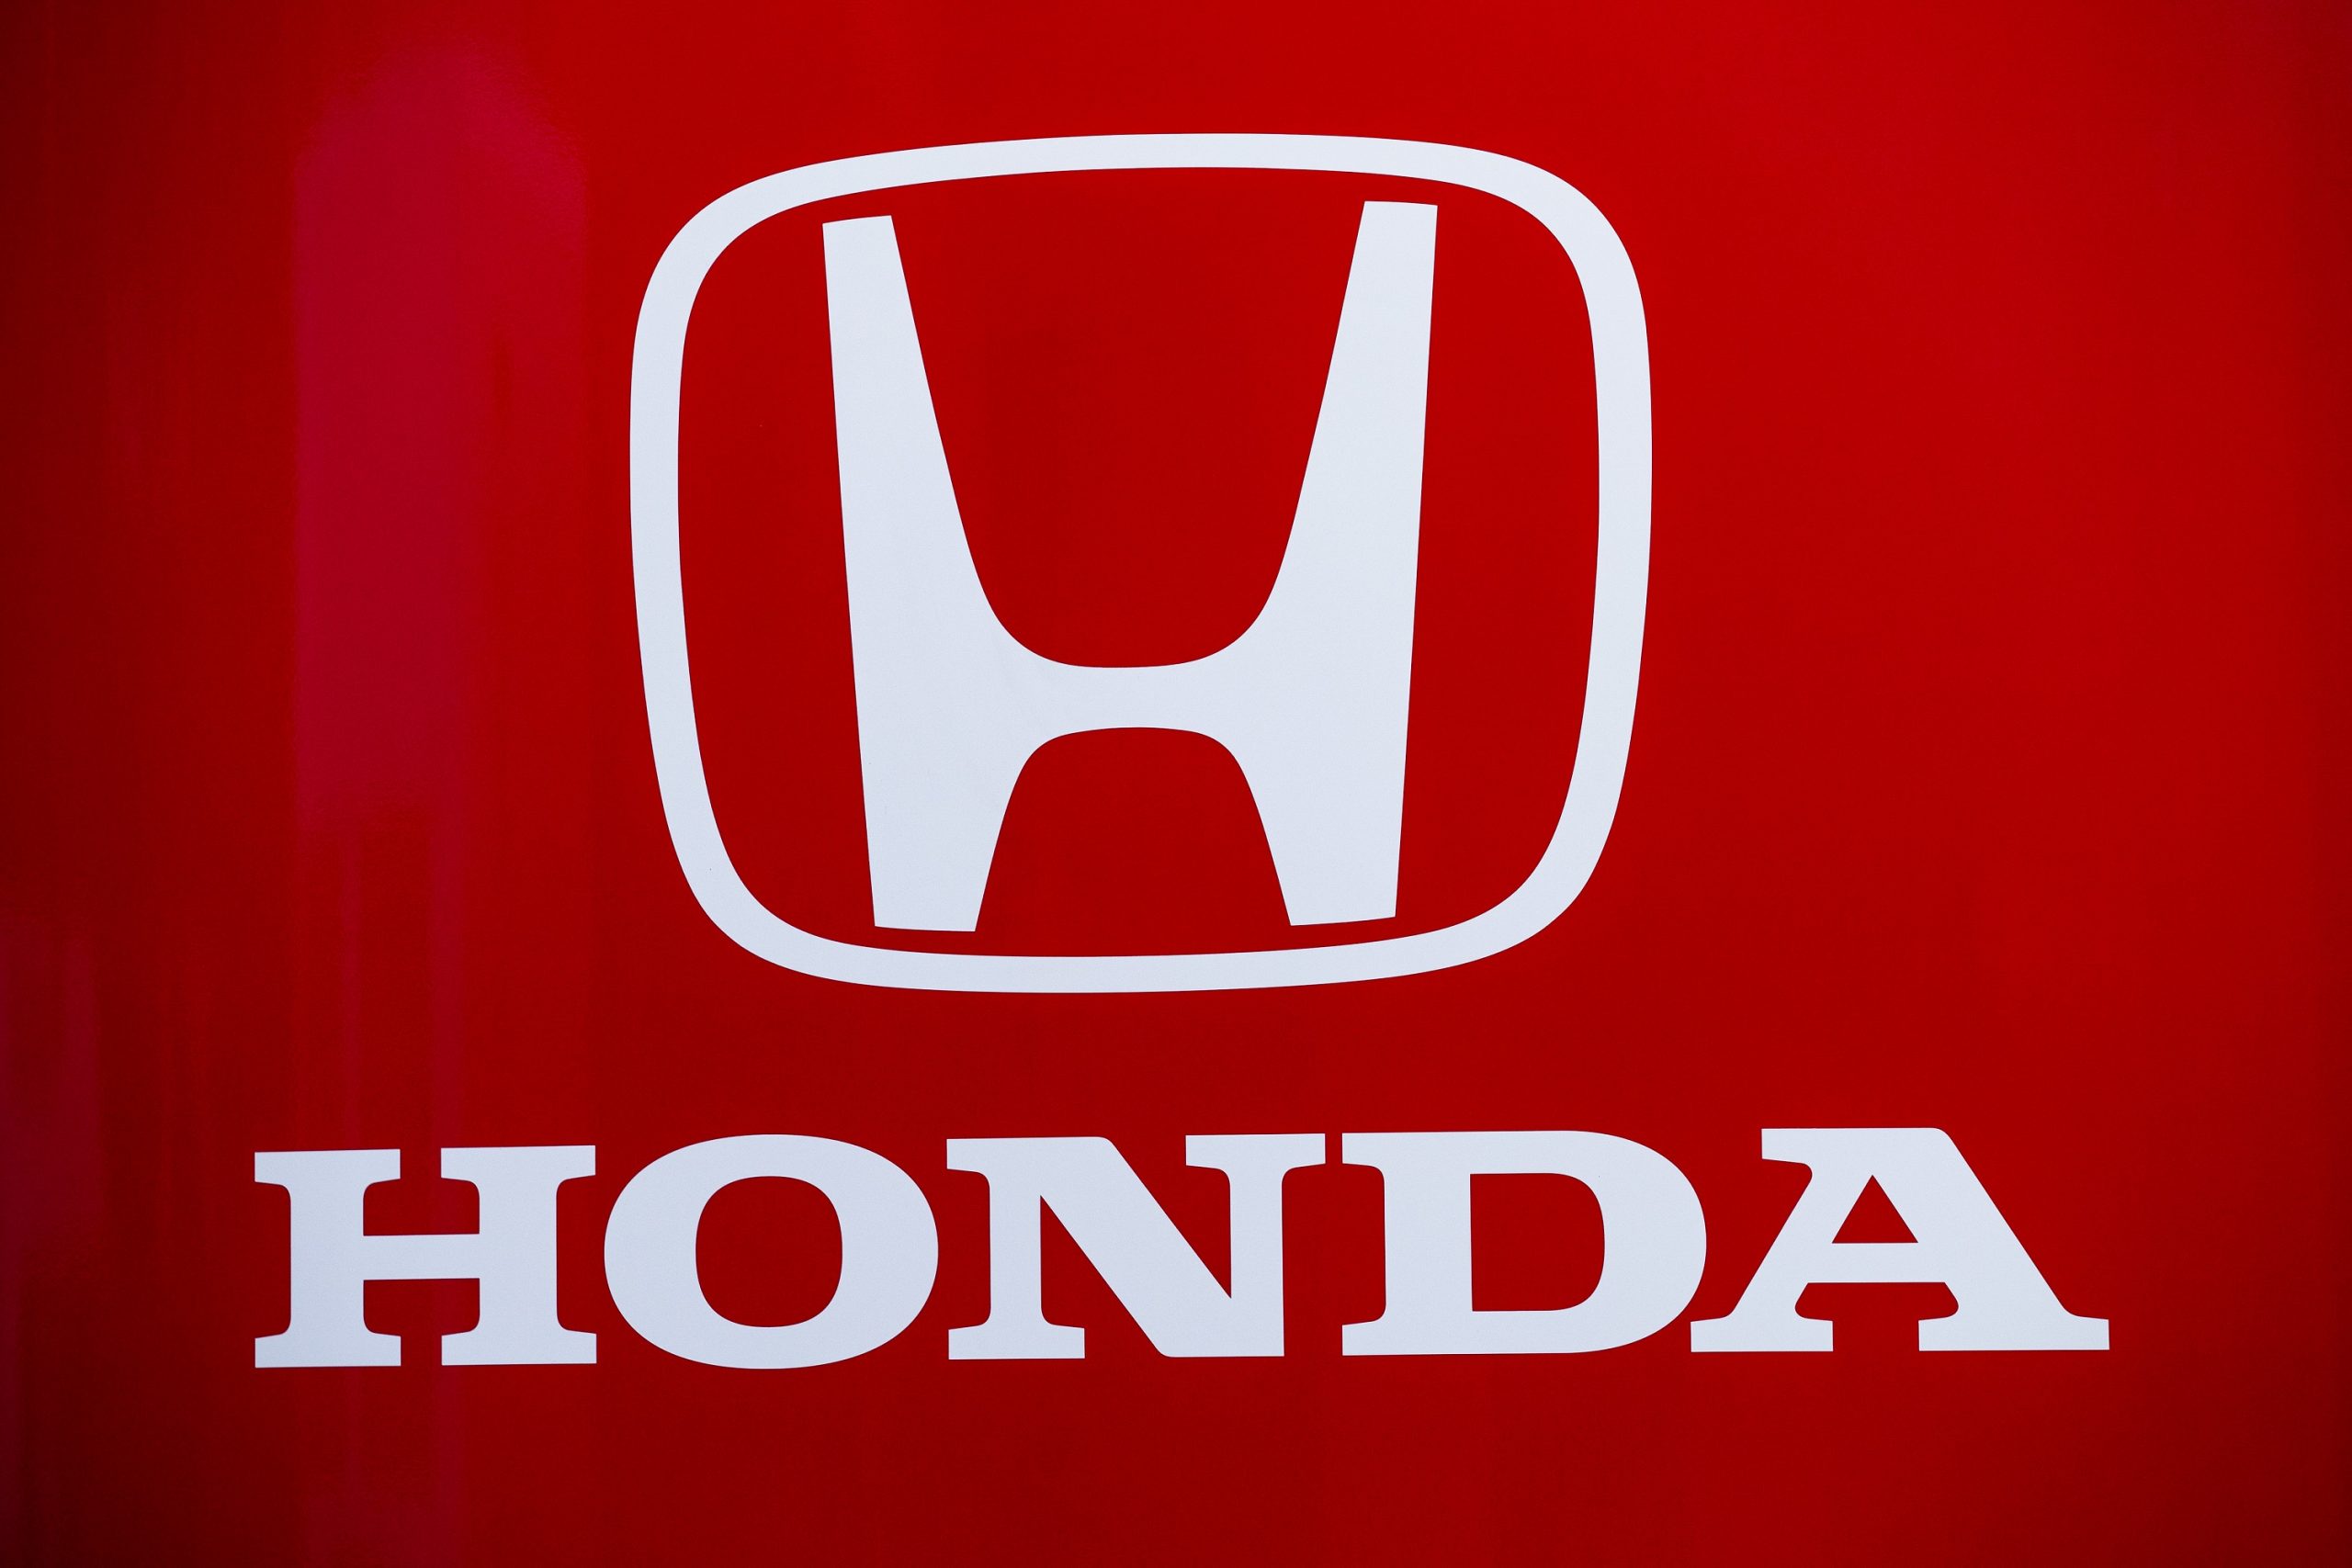 The Honda logo in white against a red background